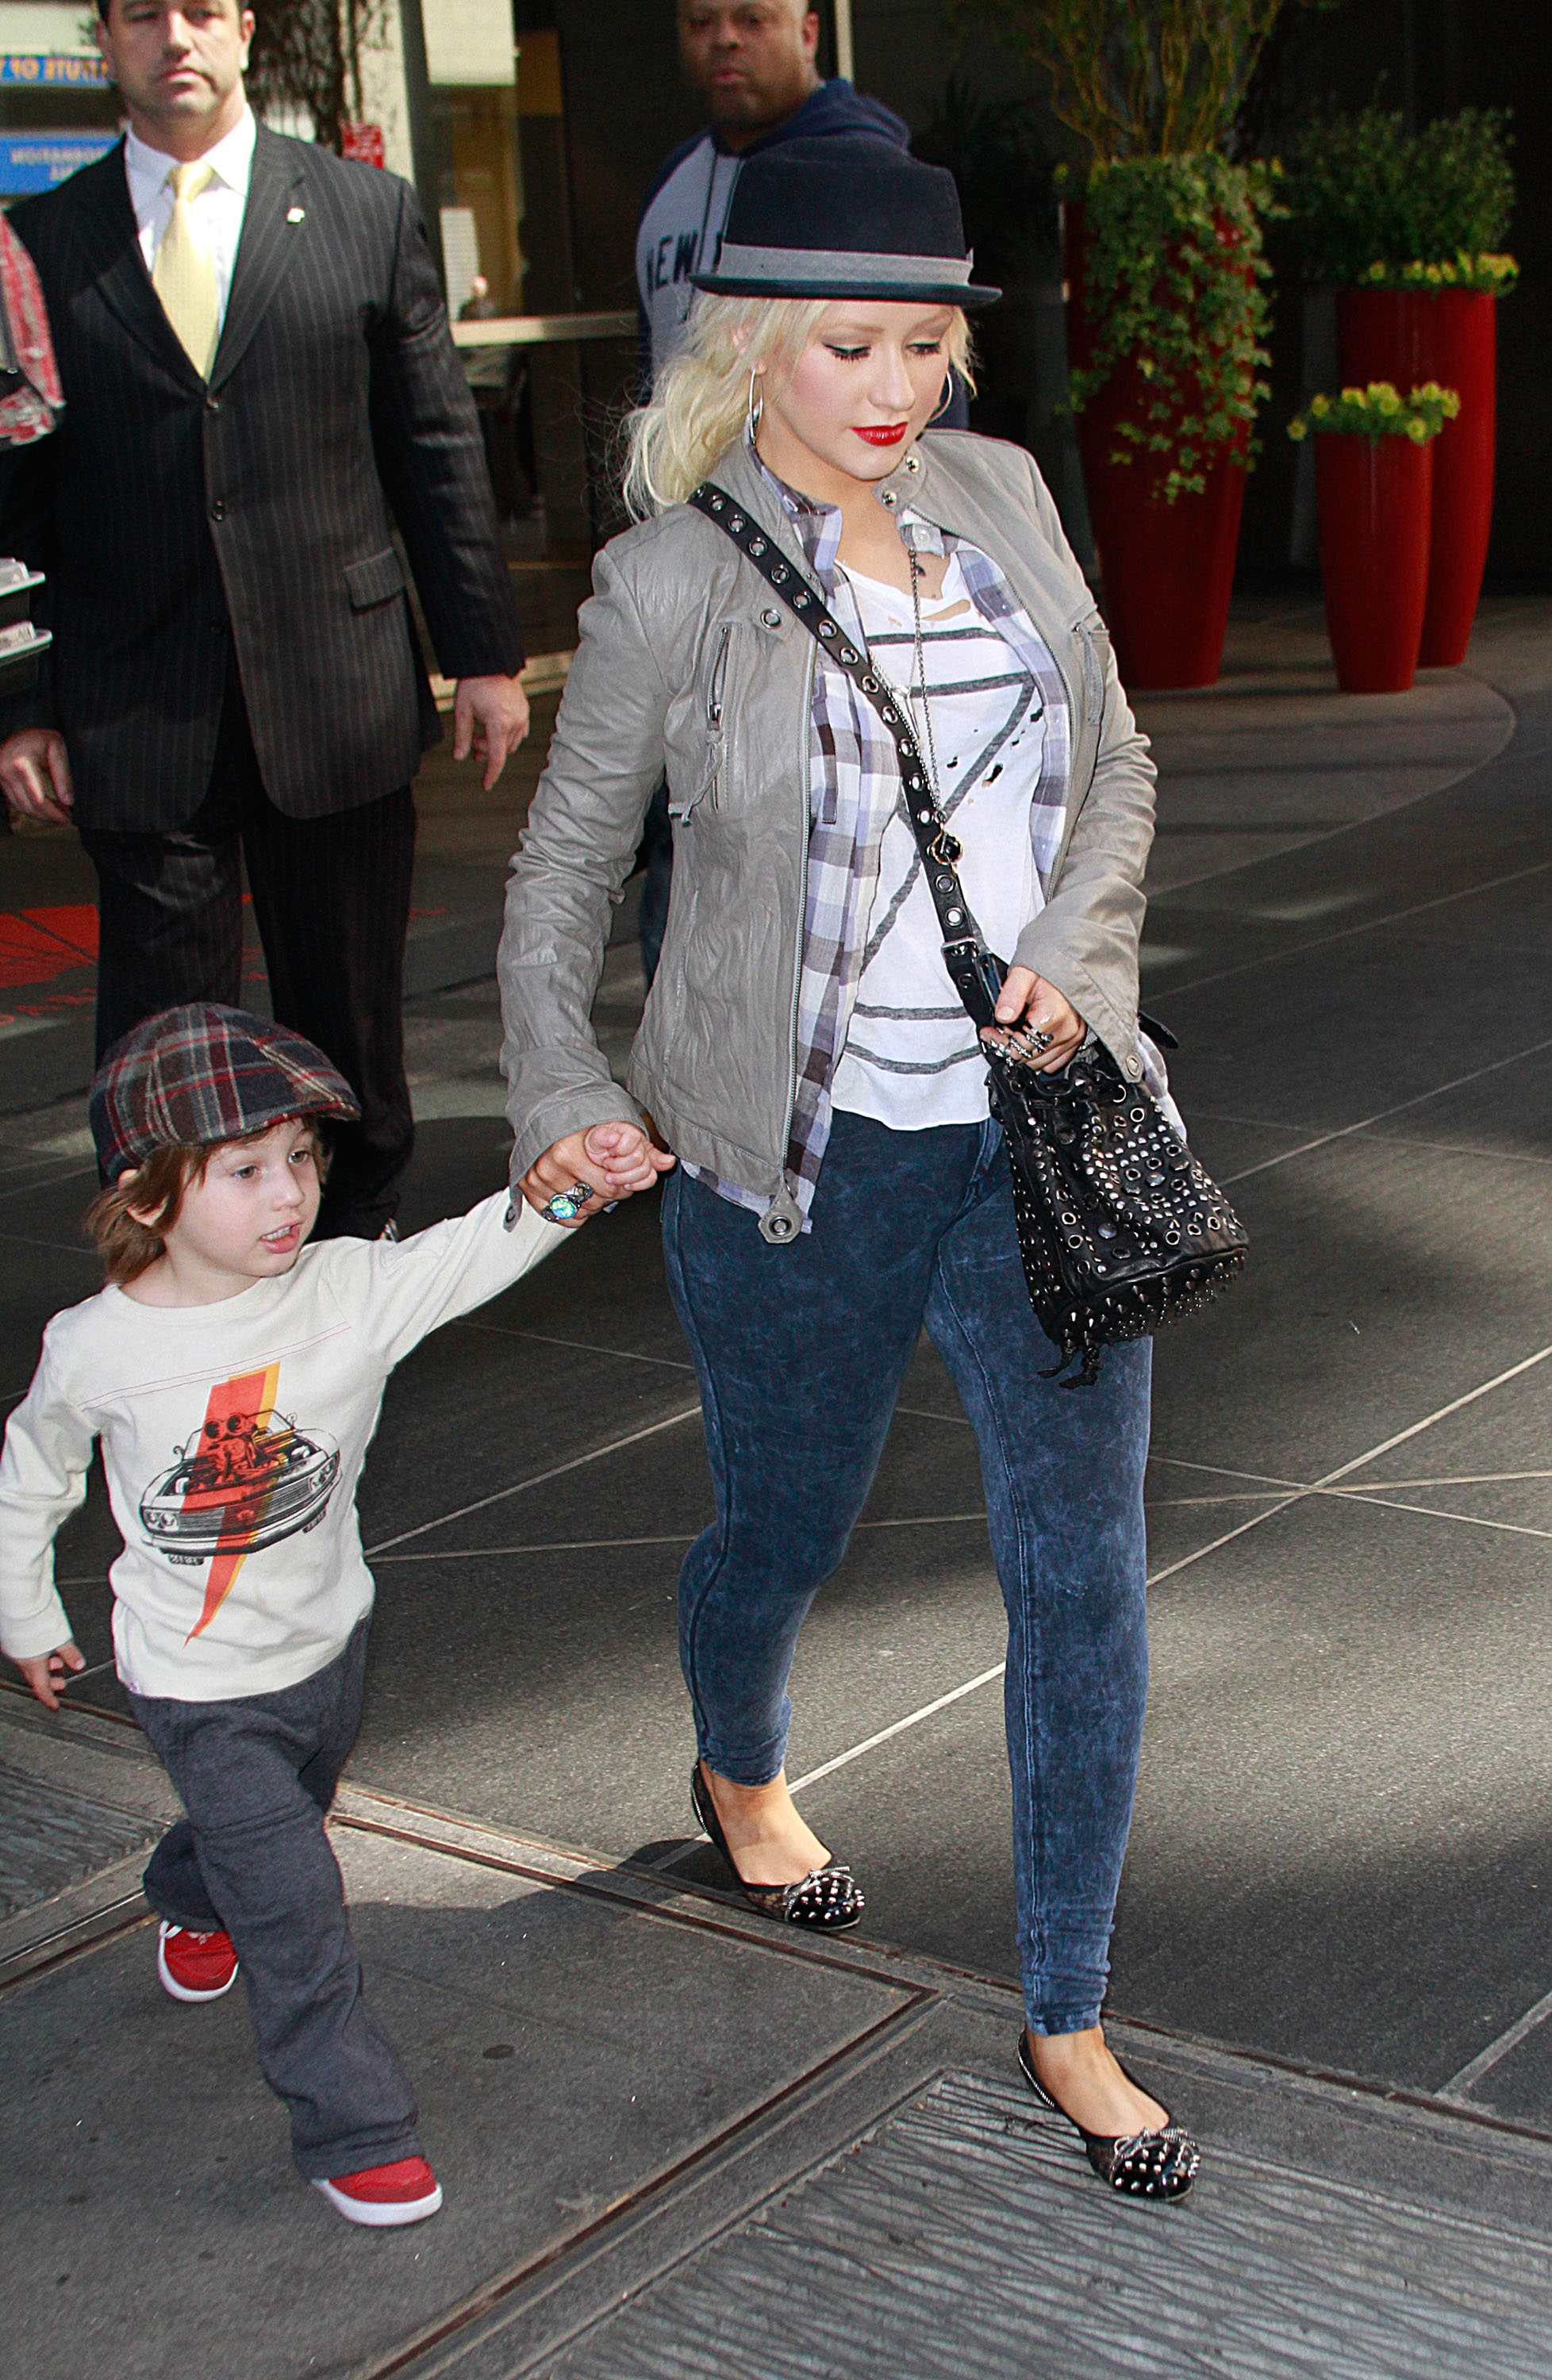 Christina Aguilera and Max Liron Bratman in New York in 2011 | Source: Getty Images